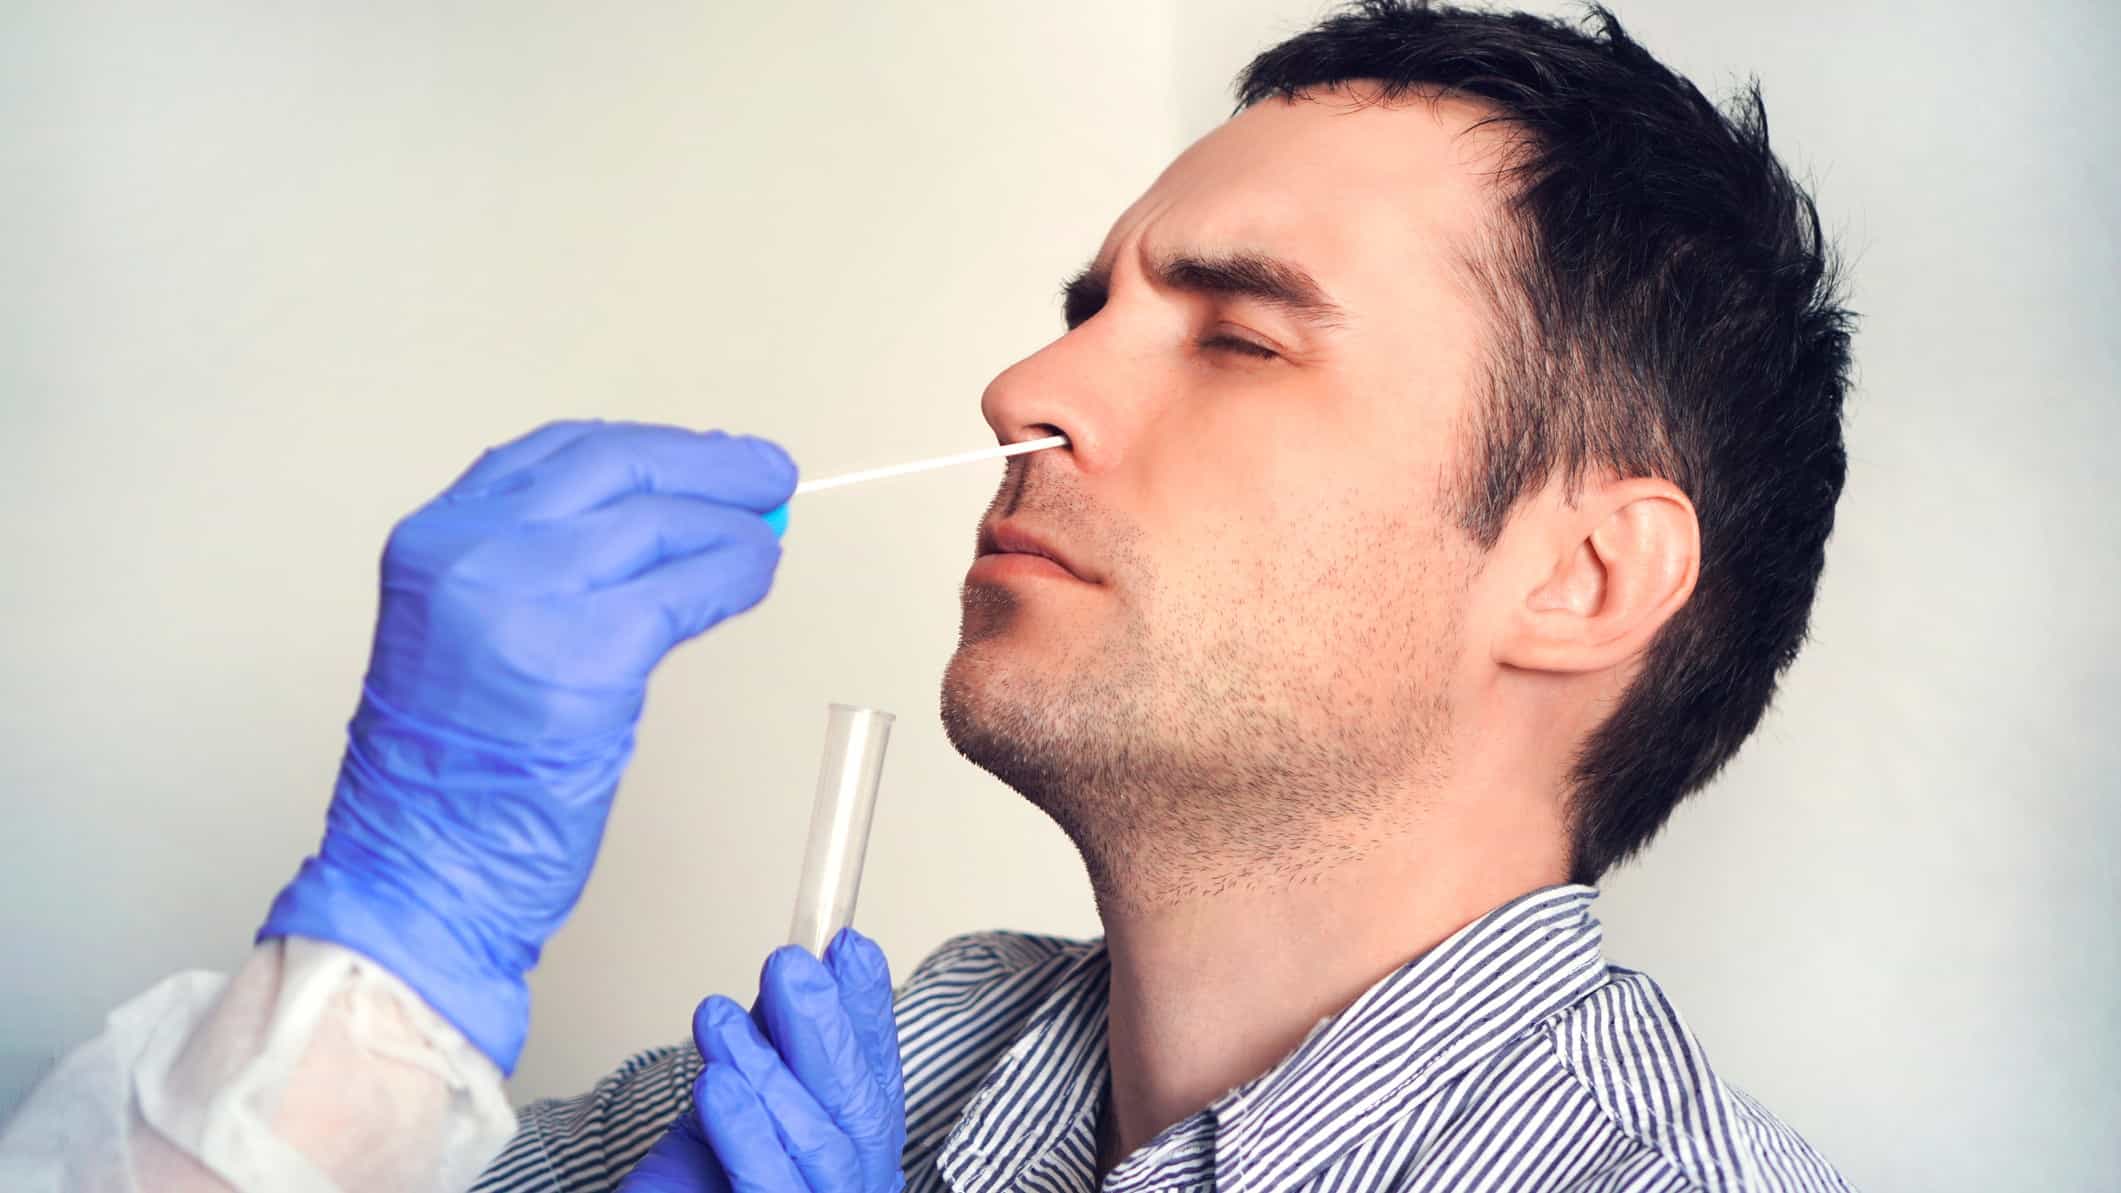 Sonic Healthcare share price represented by man receiveing nasal swab from medical professional